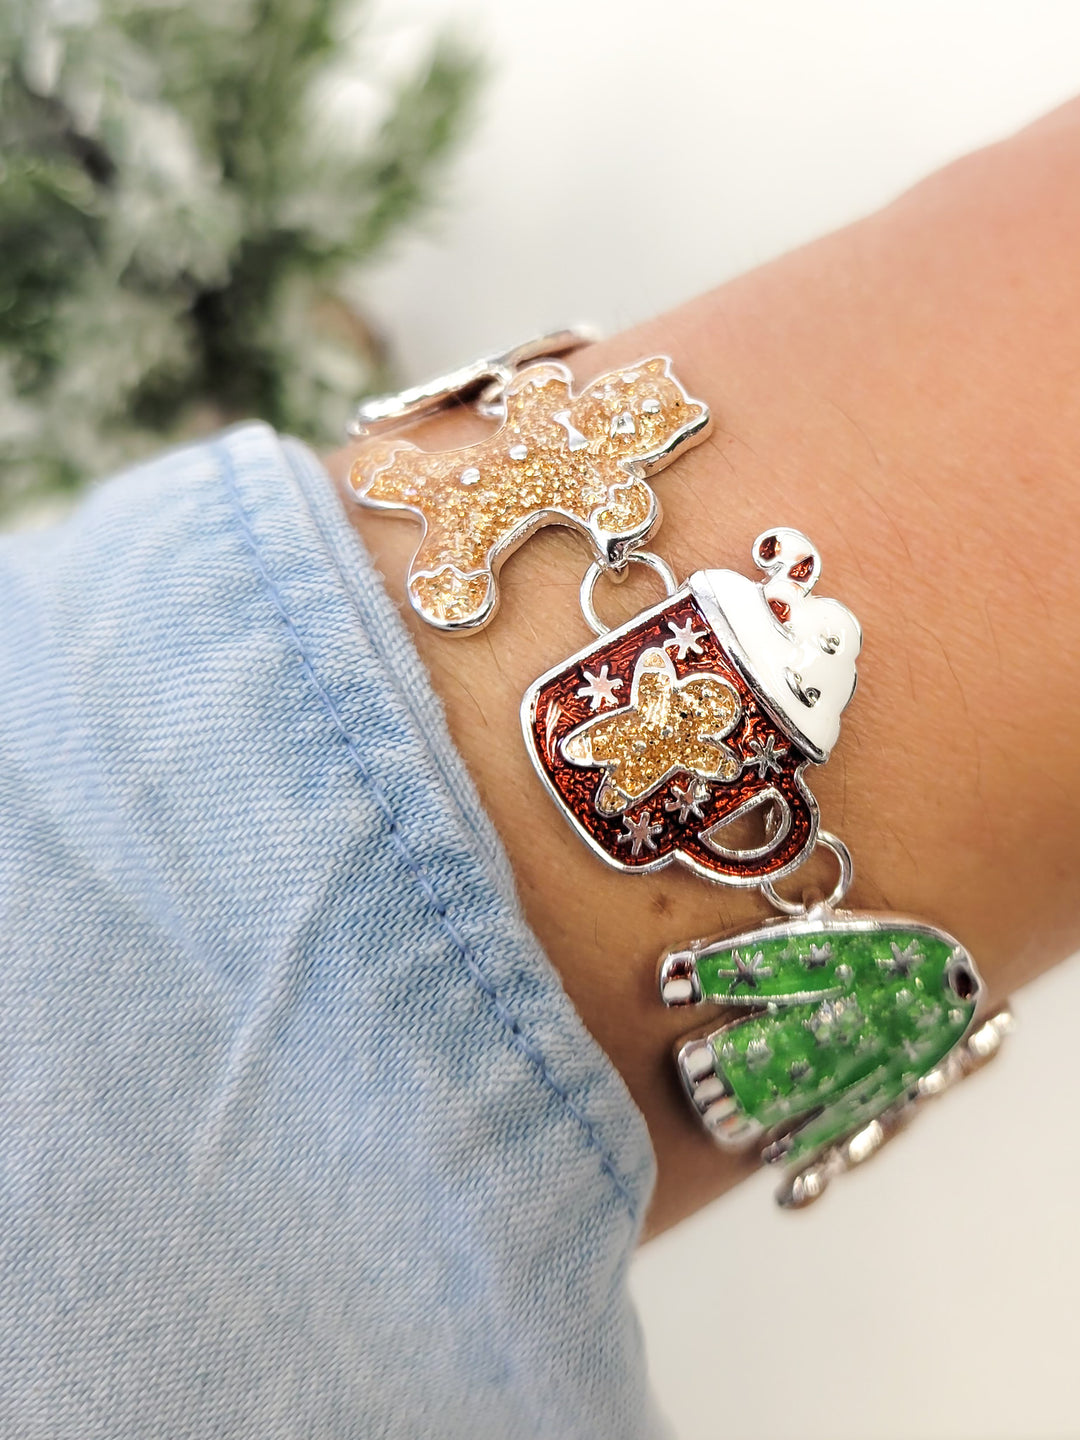 Buy the Silver Christmas Charm Bracelet with Gingerbread Man